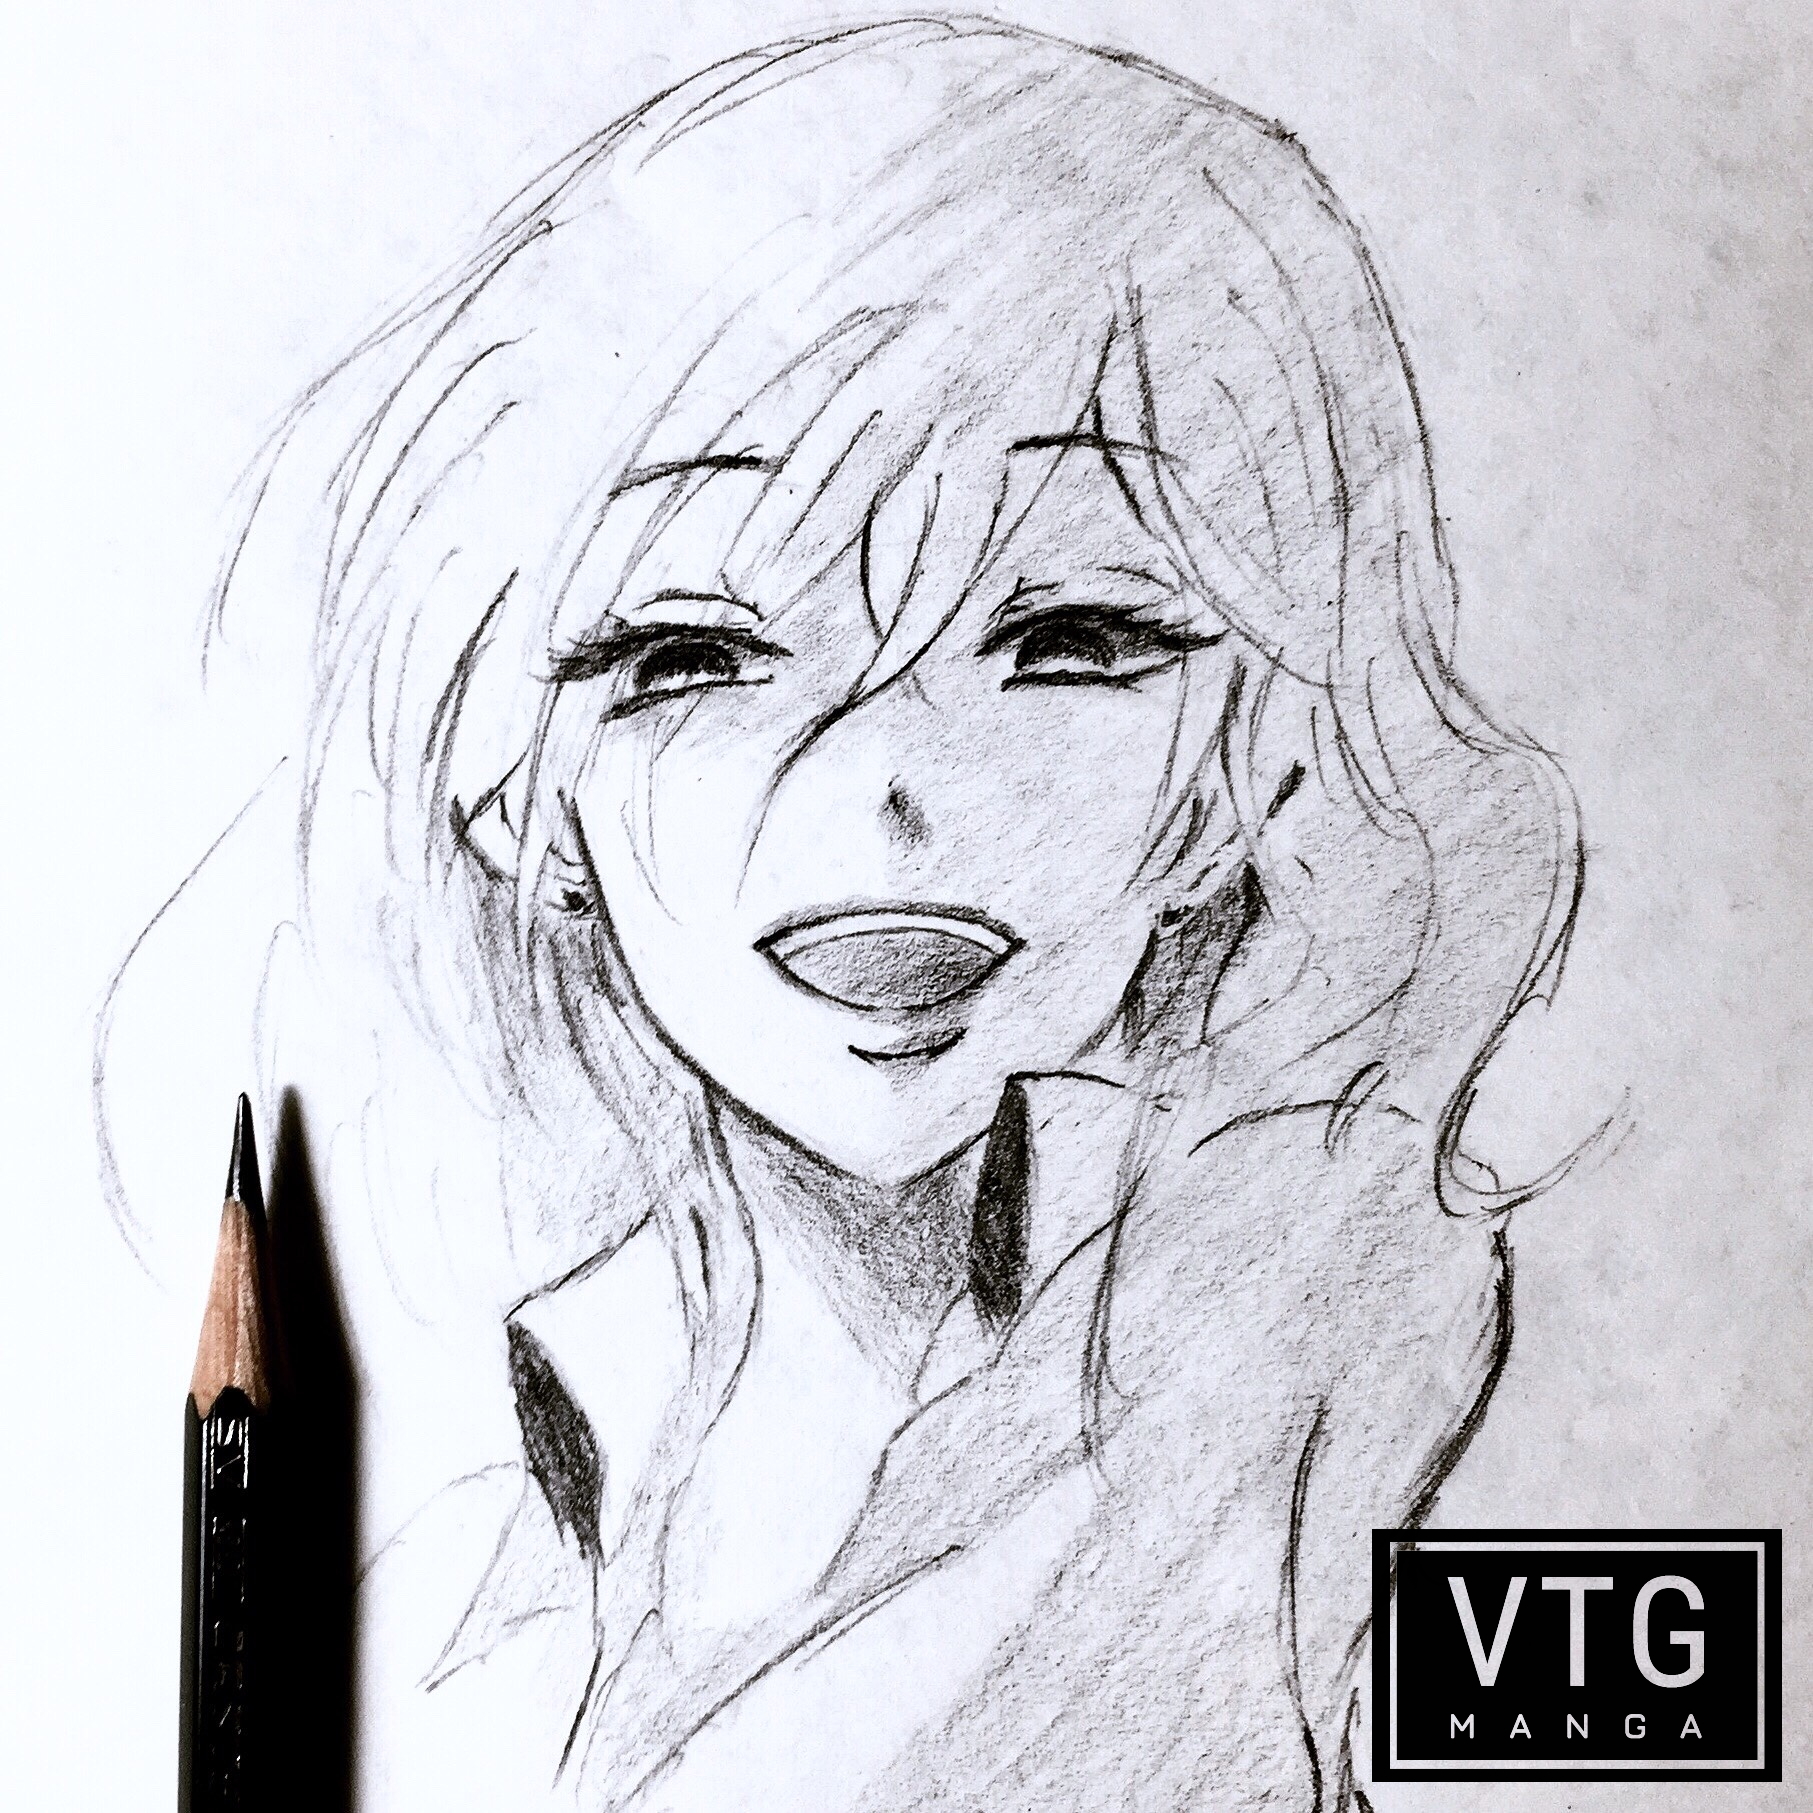 Drawing Anime Girl Using Only ONE Pencil by DrawingTimeWithMe on DeviantArt